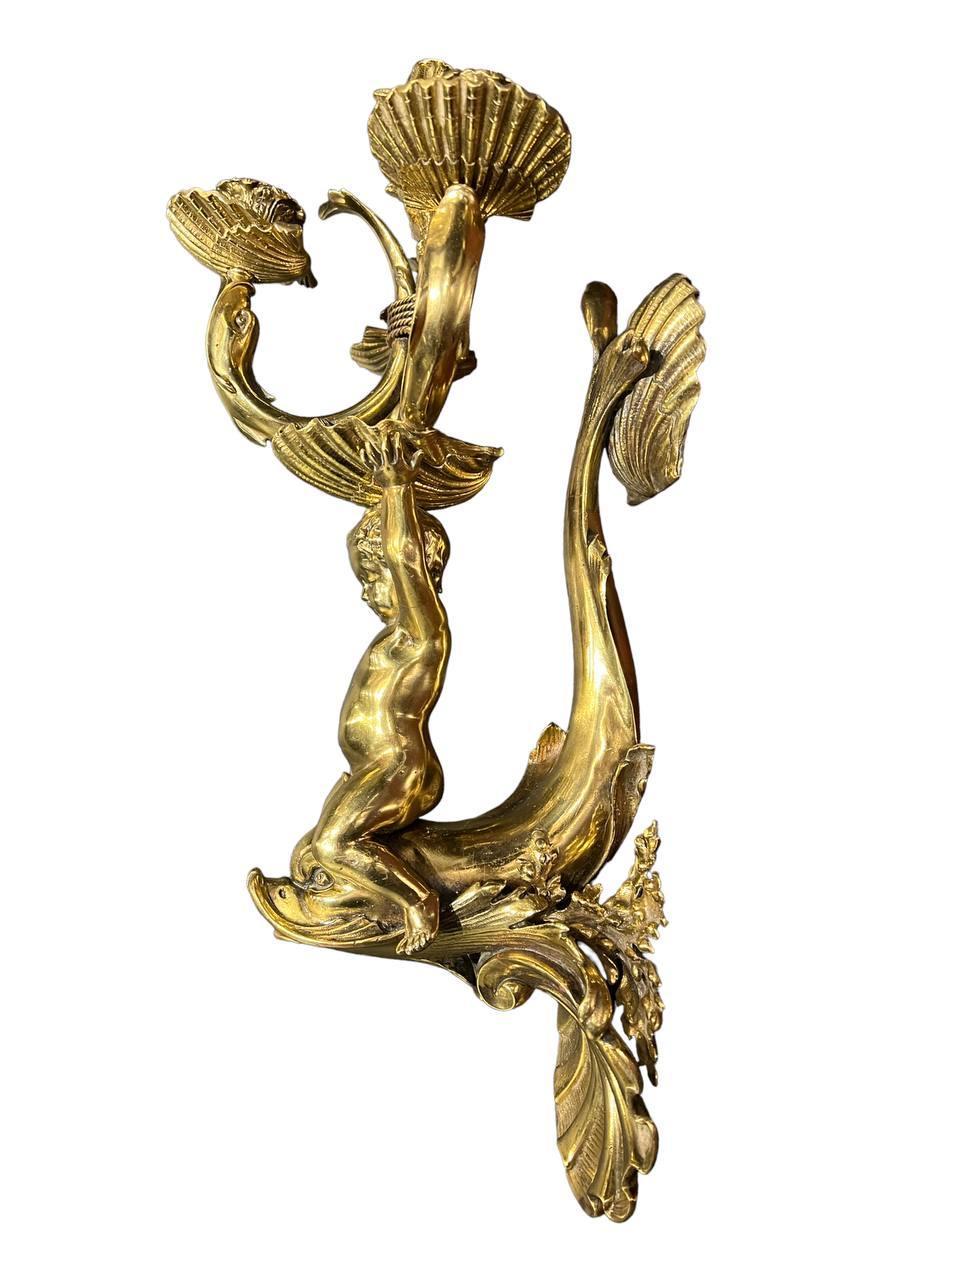 A circa 1900’s Caldwell gilt bronze single sconce with cherub on a dolphin holding 3 lights on shells and one light on top shell. Large size and impressive details.